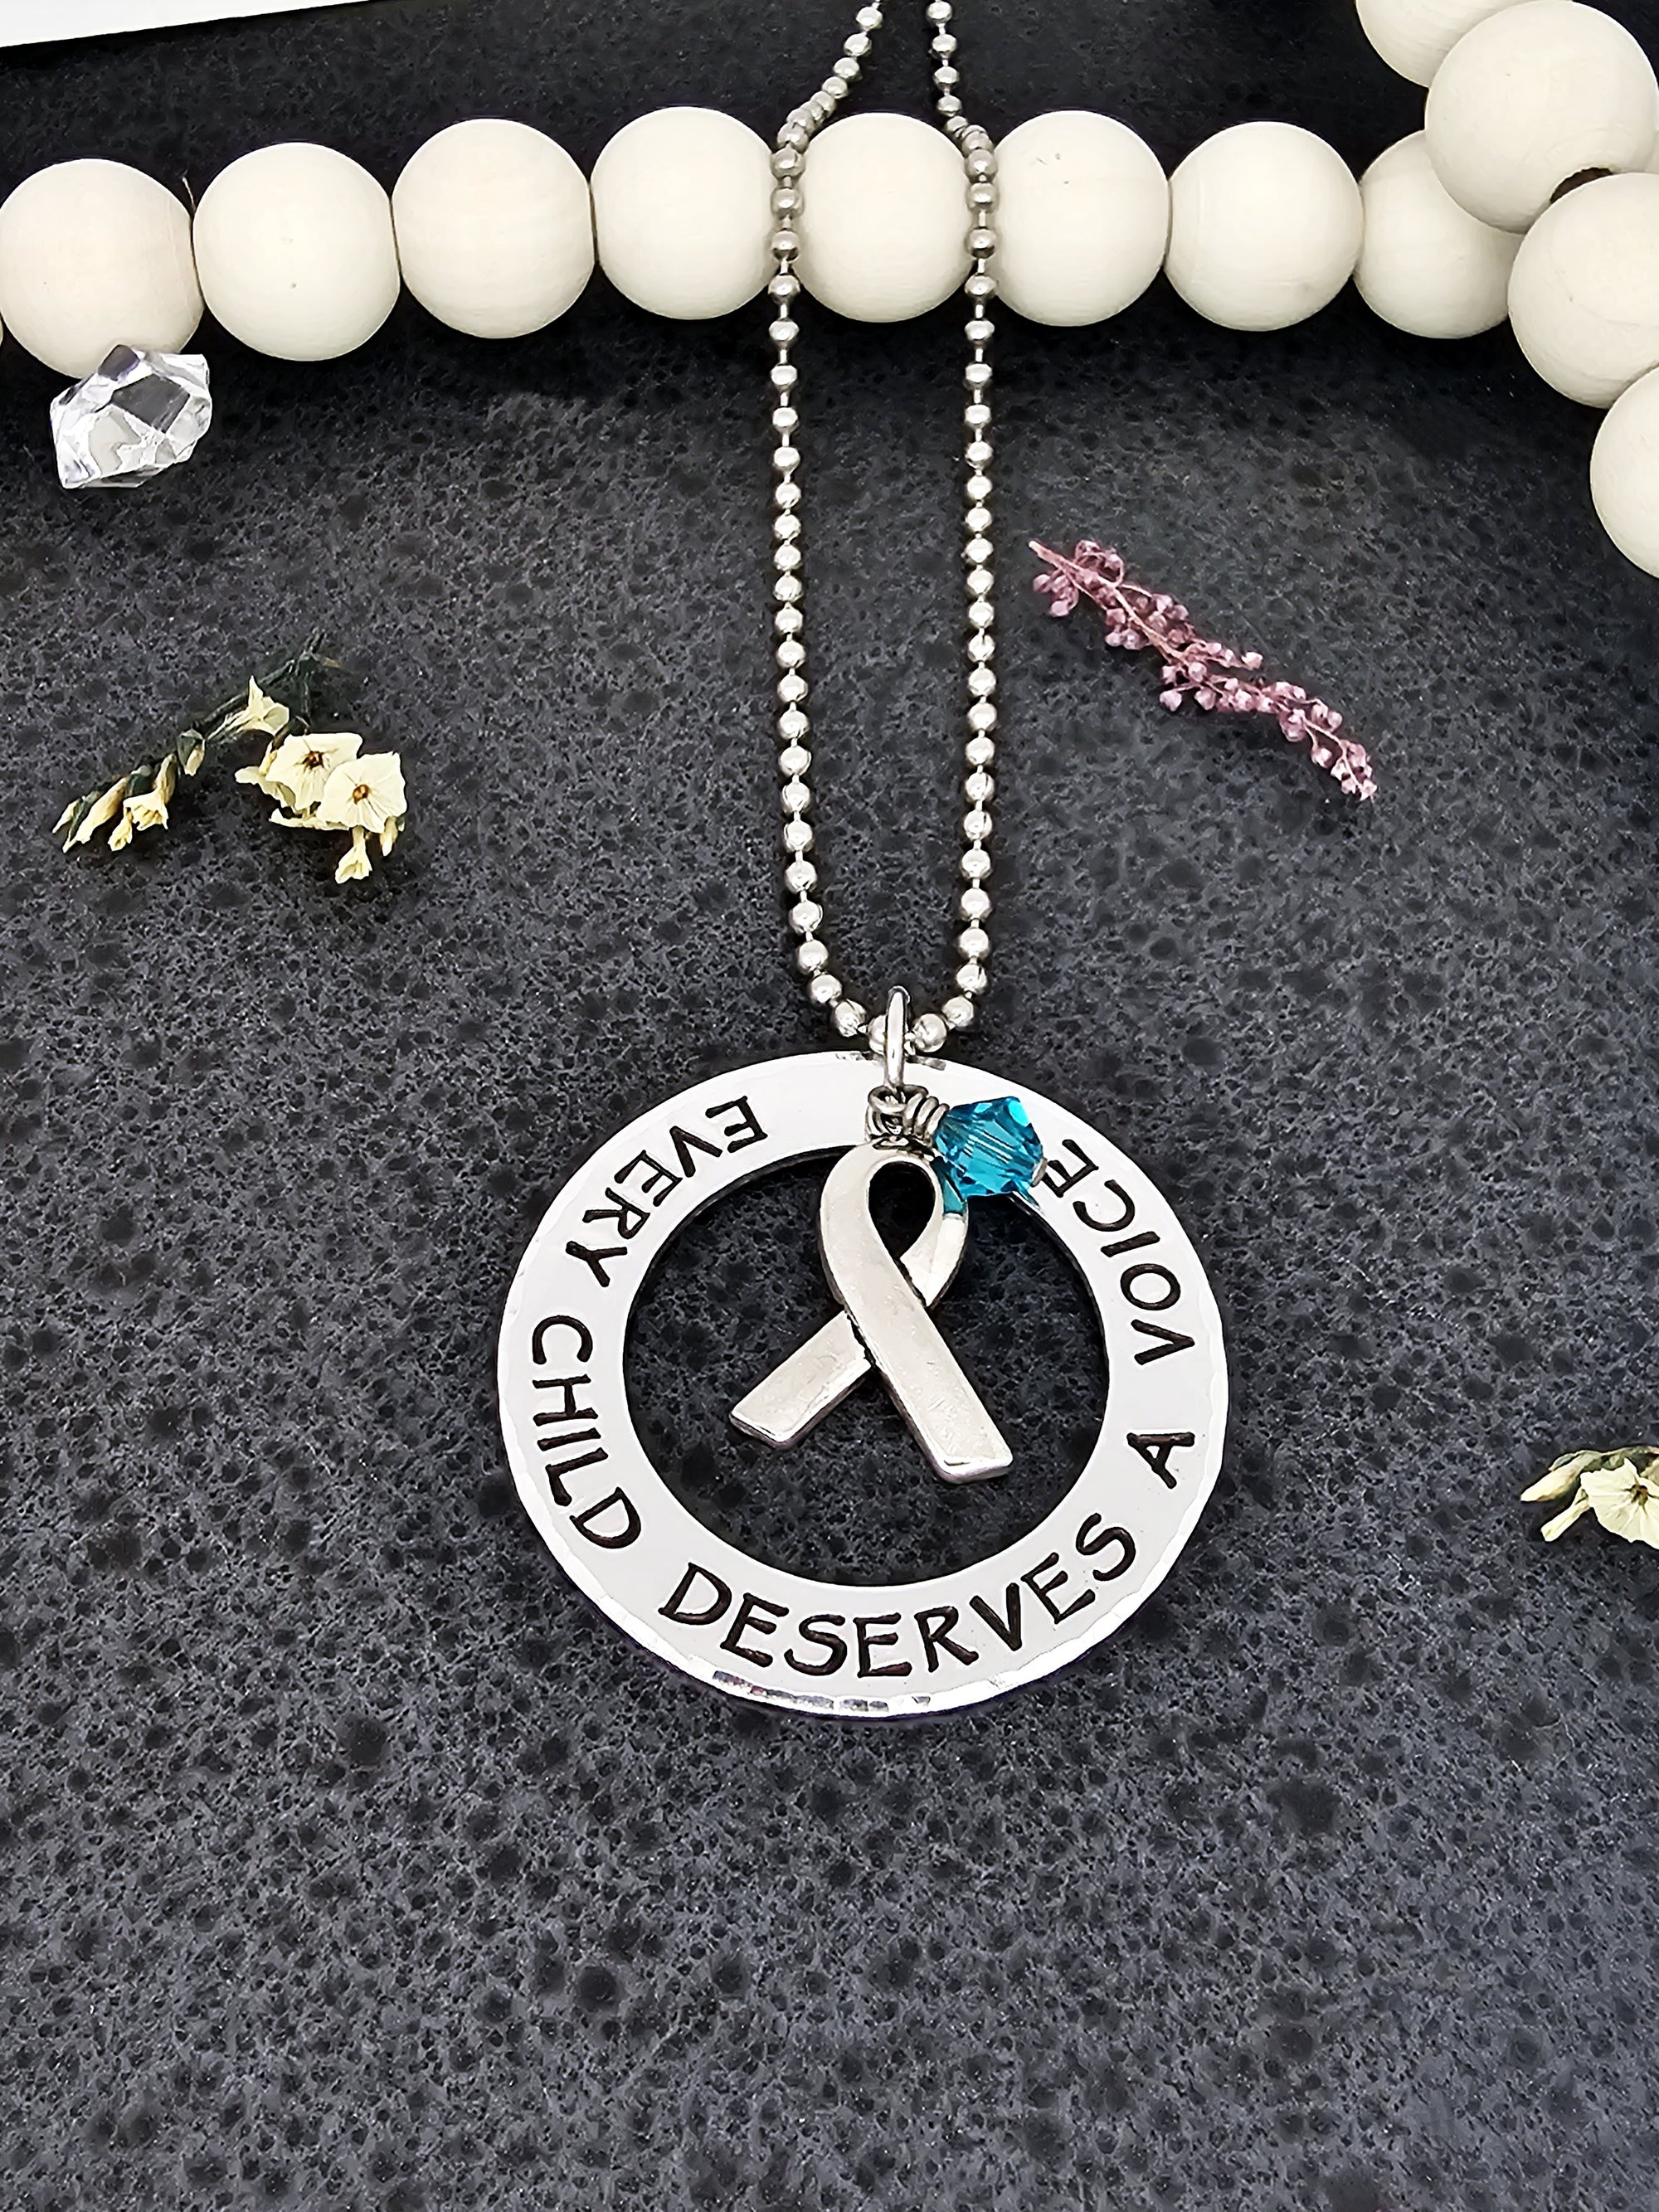 Every Child Deserves A Voice Necklace - Apraxia Awareness & Support - Apraxia of Speech